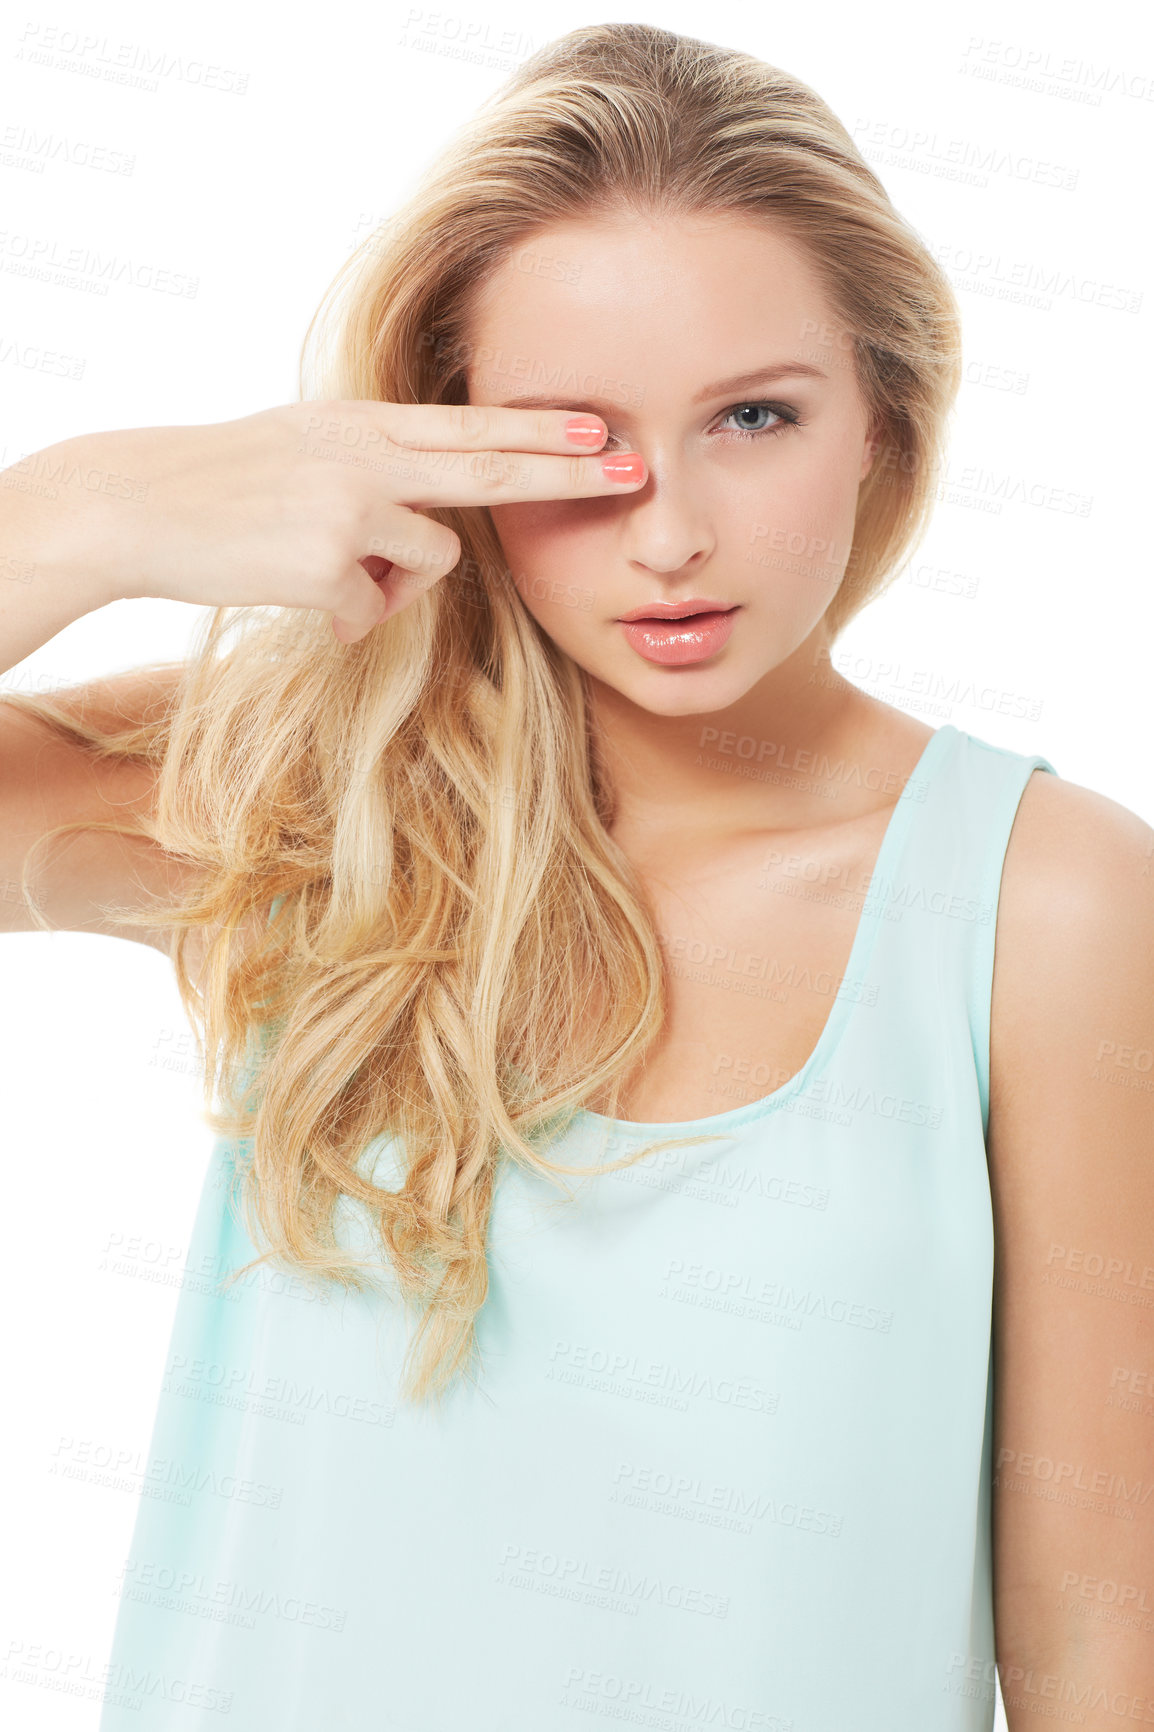 Buy stock photo A pretty young woman snipping her fingers over her eyes while isolated on white